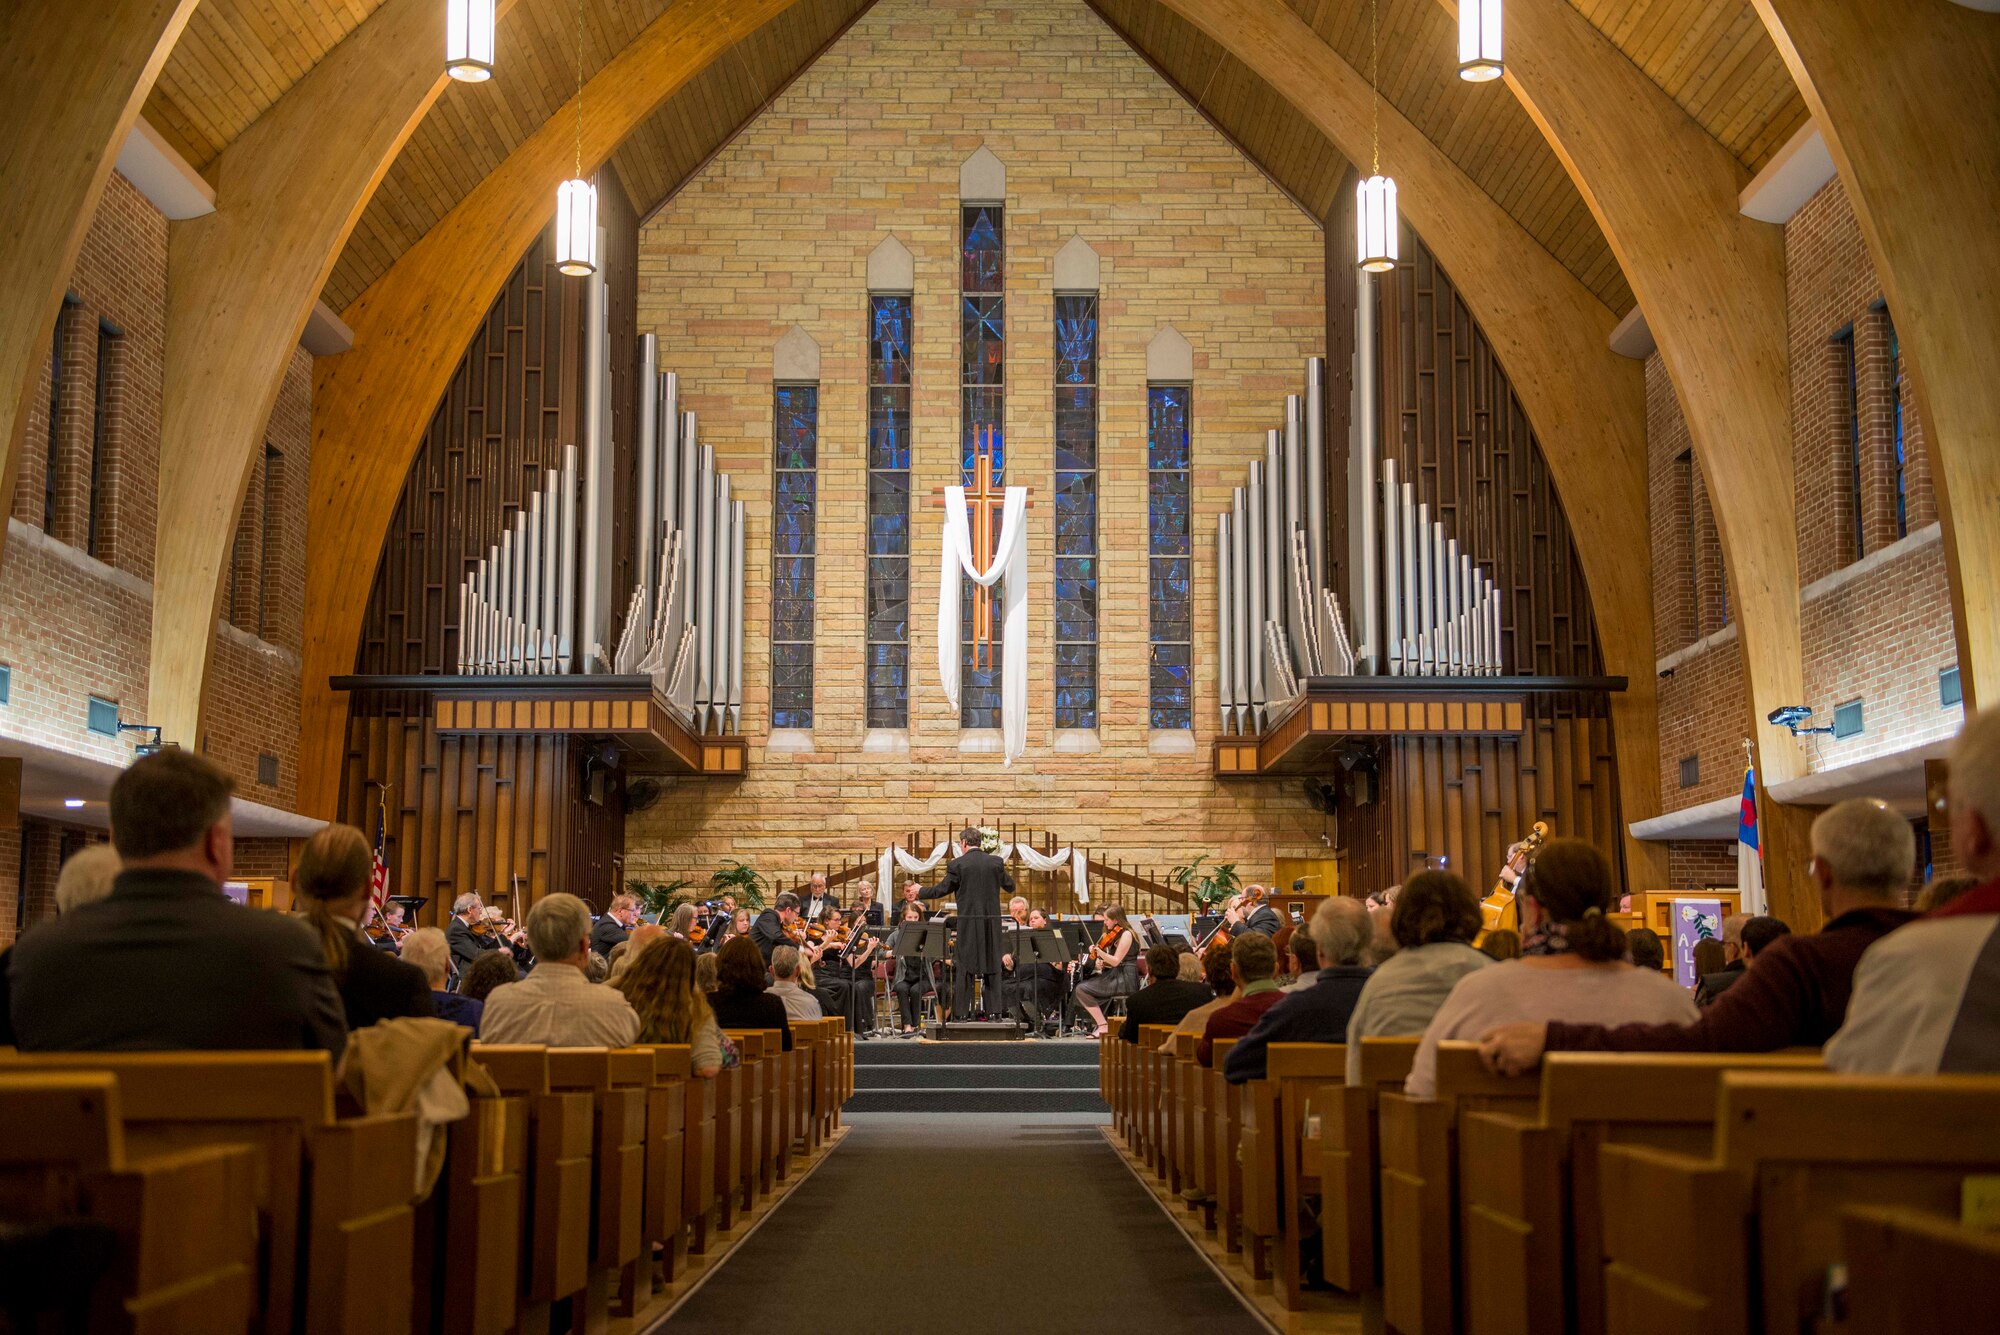 The Belleville Philharmonic Orchestra performs April 28, 2018, at the Saint Paul United Church of Christ in Belleville, Illinois. The orchestra is the second oldest, continuously performing orchestra in the United States and has two members who are also Airmen in the 375th Air Mobility Wing at Scott Air Force Base, Illinois. (U.S. Air Force Photo by Airman 1st Class Chad Gorecki)